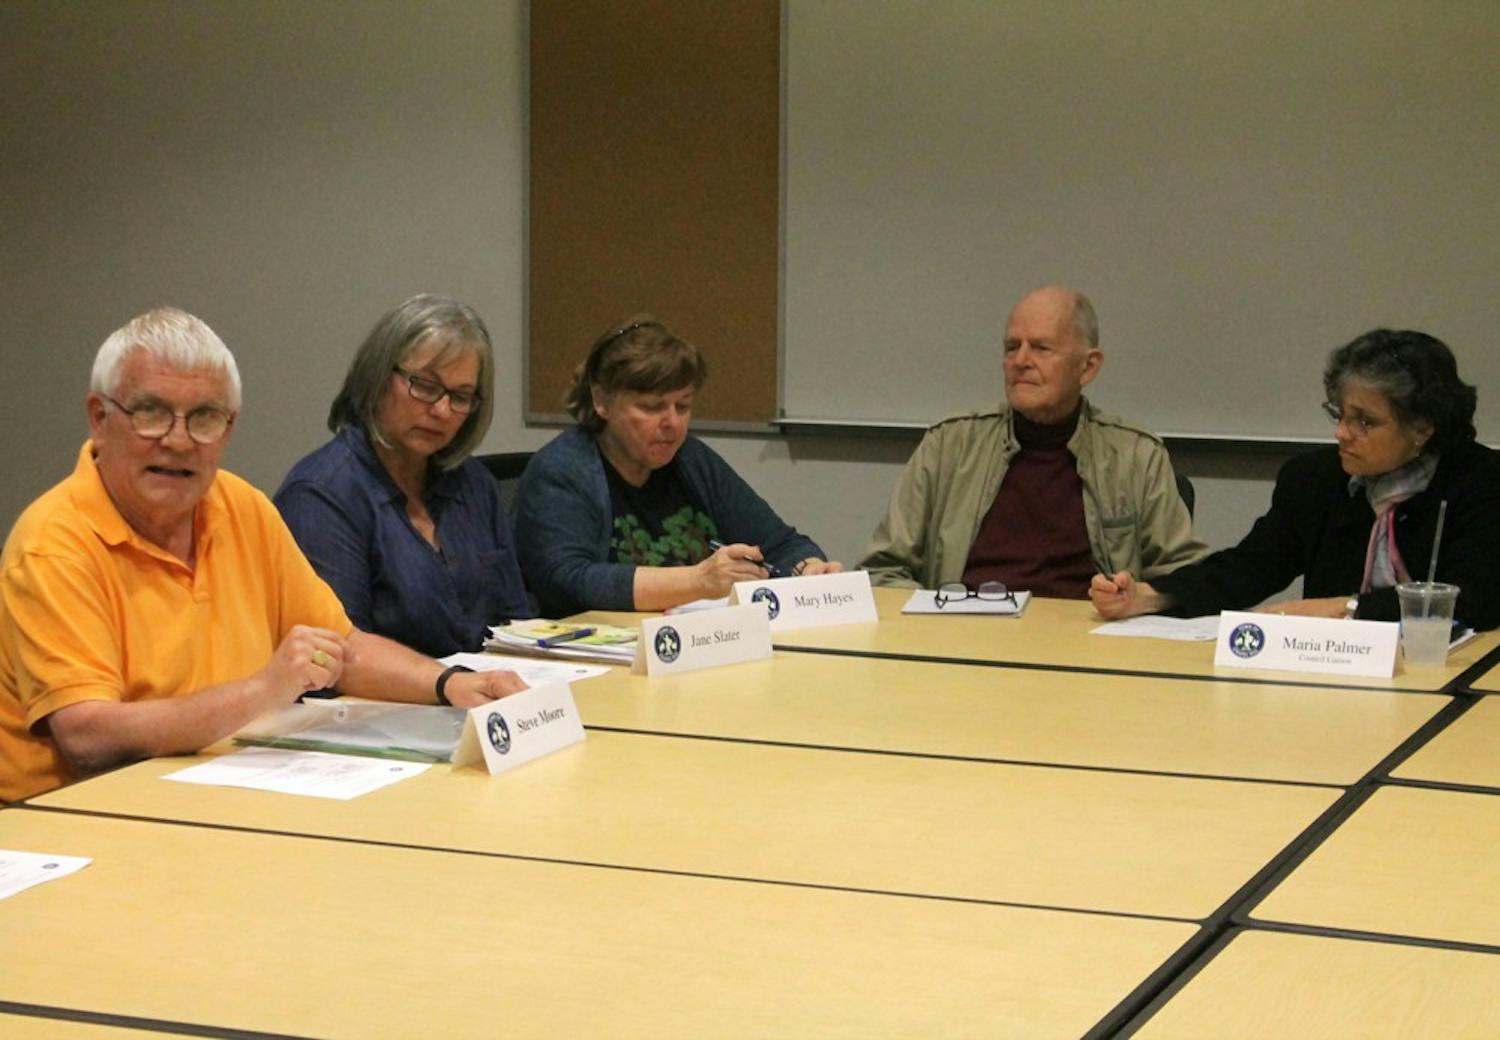 (Left) Steve Moore, Jane Slater, Mary Hayes, Sanley Peele, and Maria Palmer discuss a removed memorial during the Cemetery Advisory Board Meeting Wednesday.